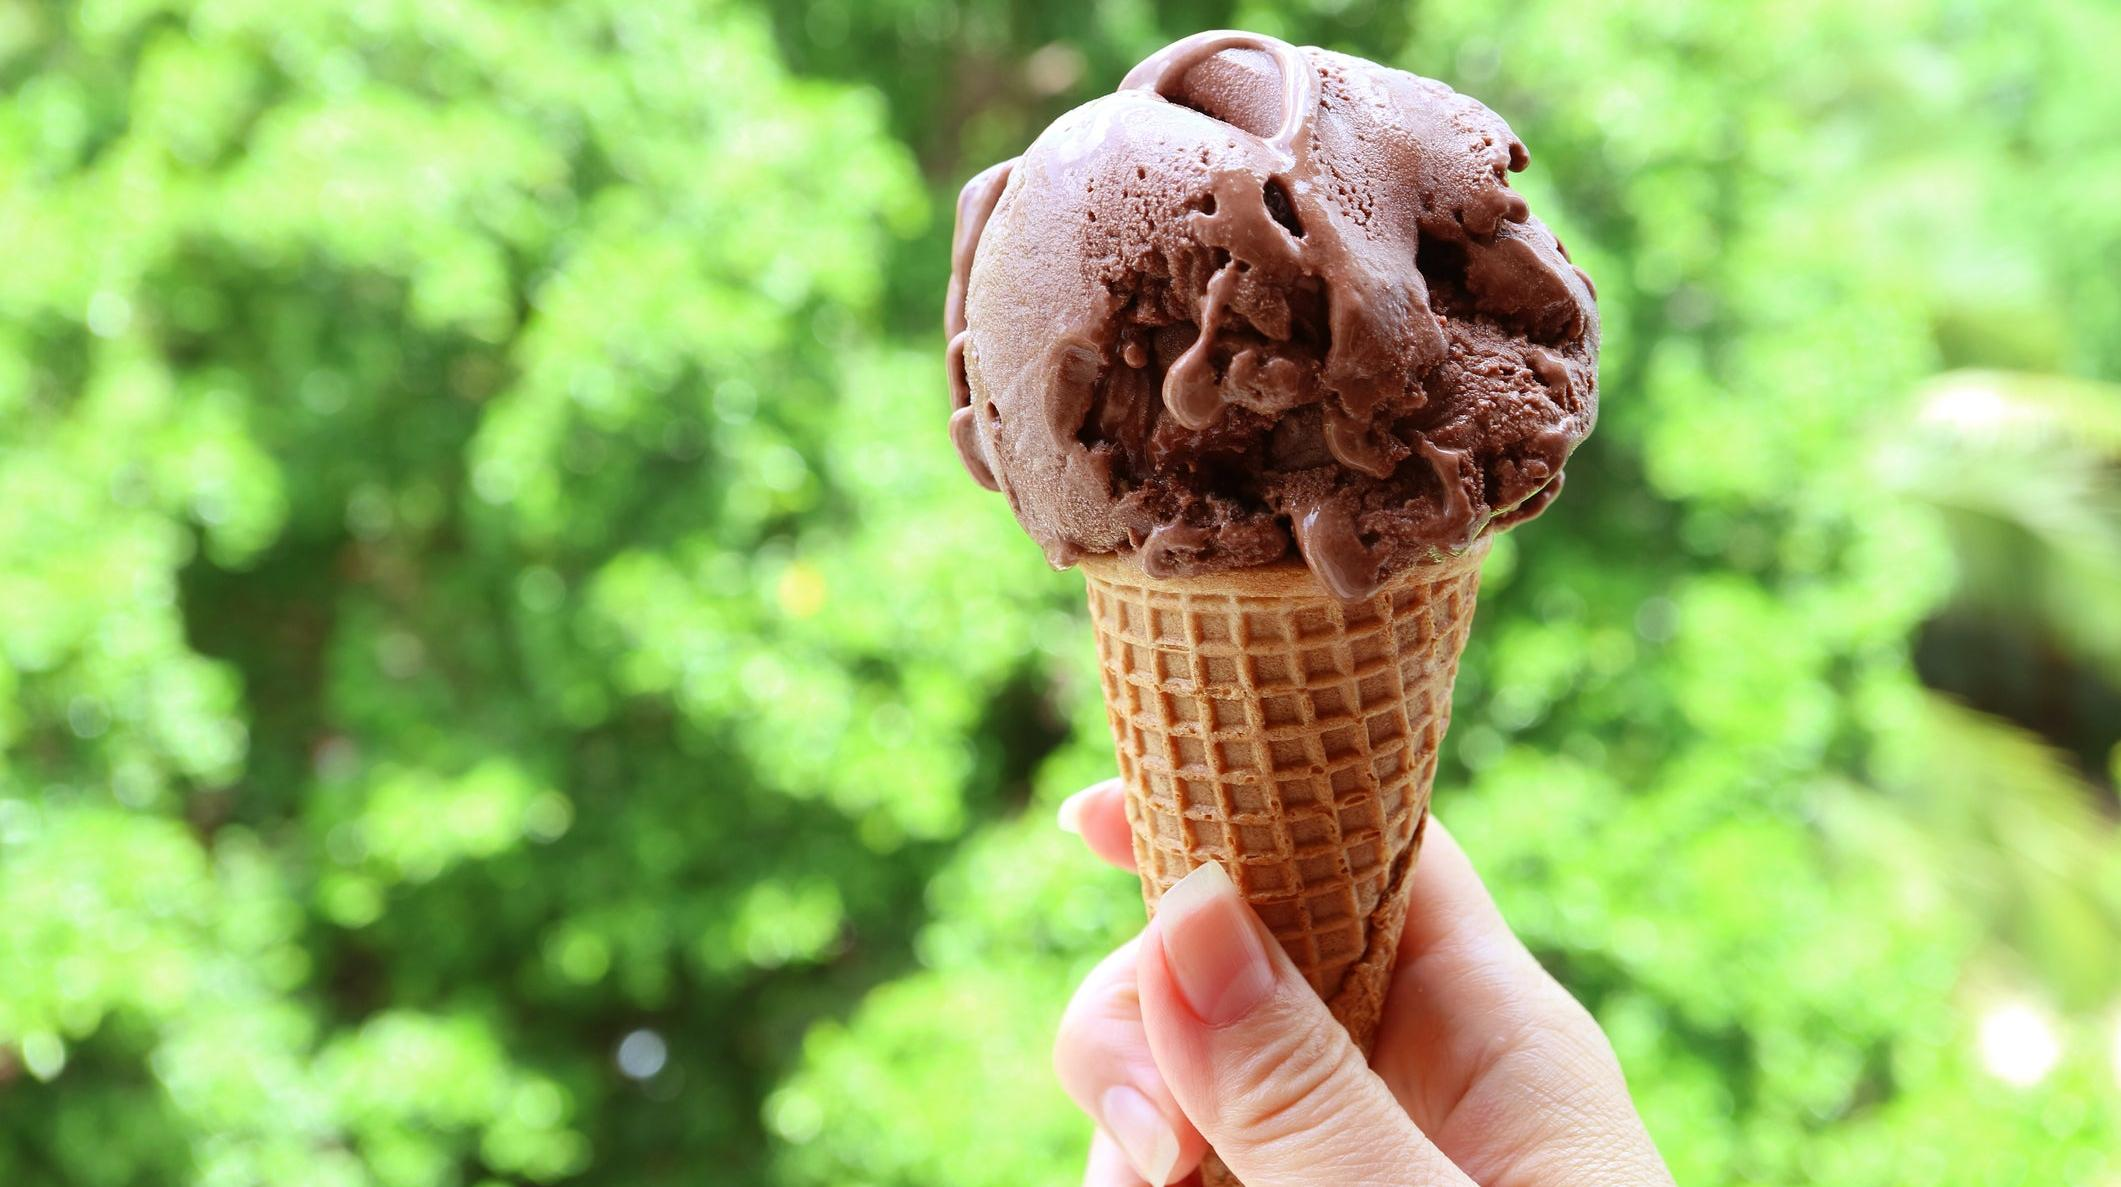 Hand holding scoop of chocolate ice cream perched on sugar cone